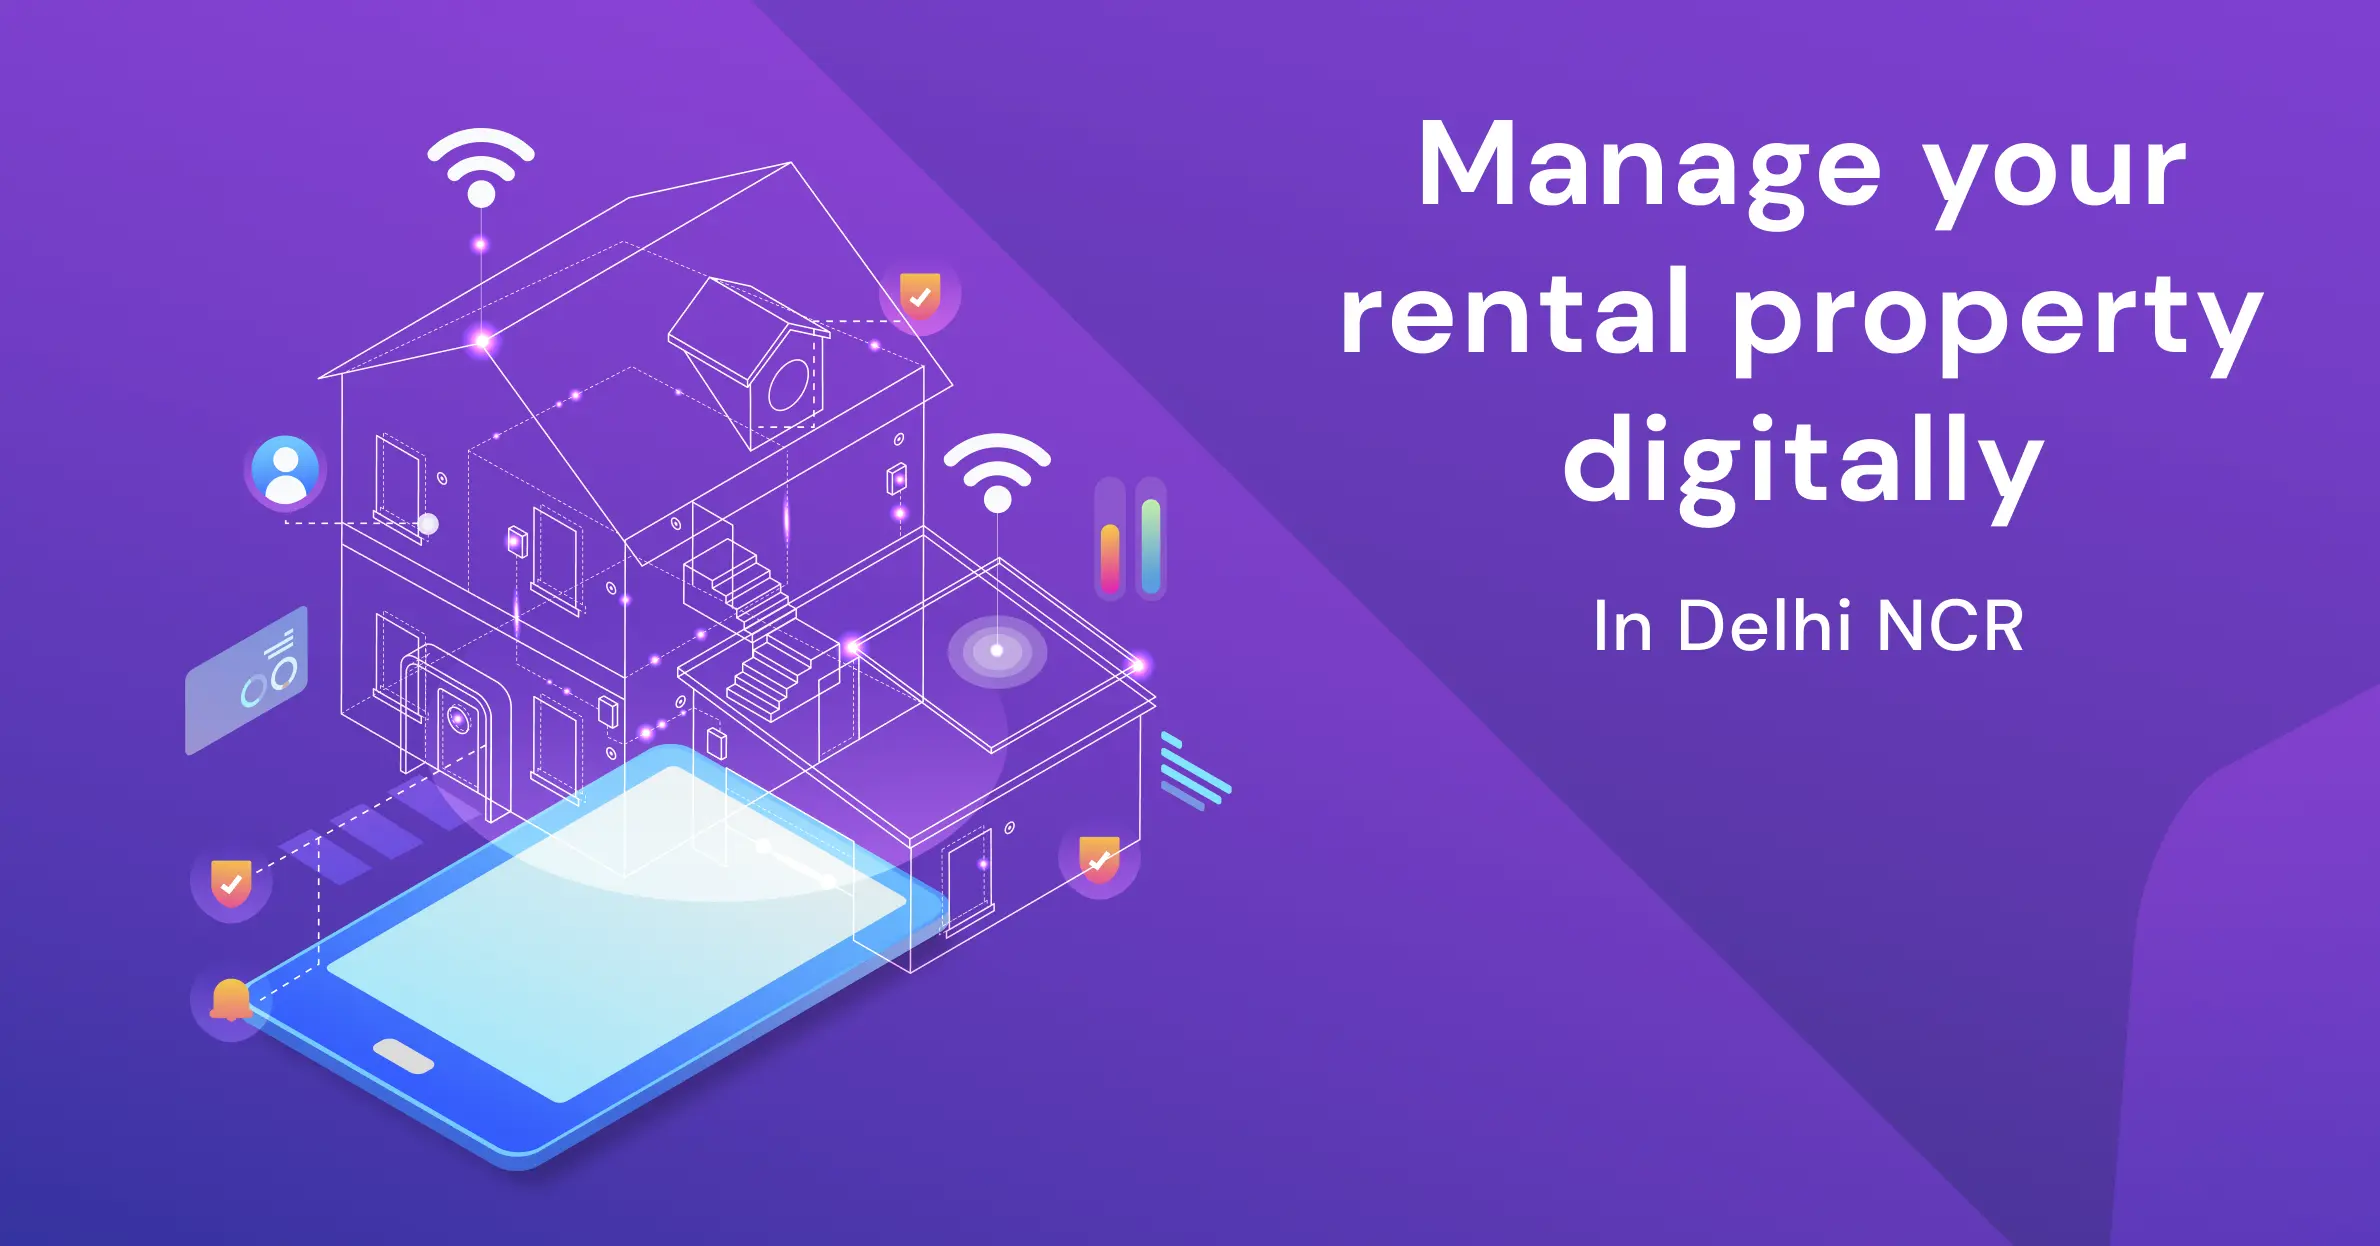 How to manage your rental property digitally in India